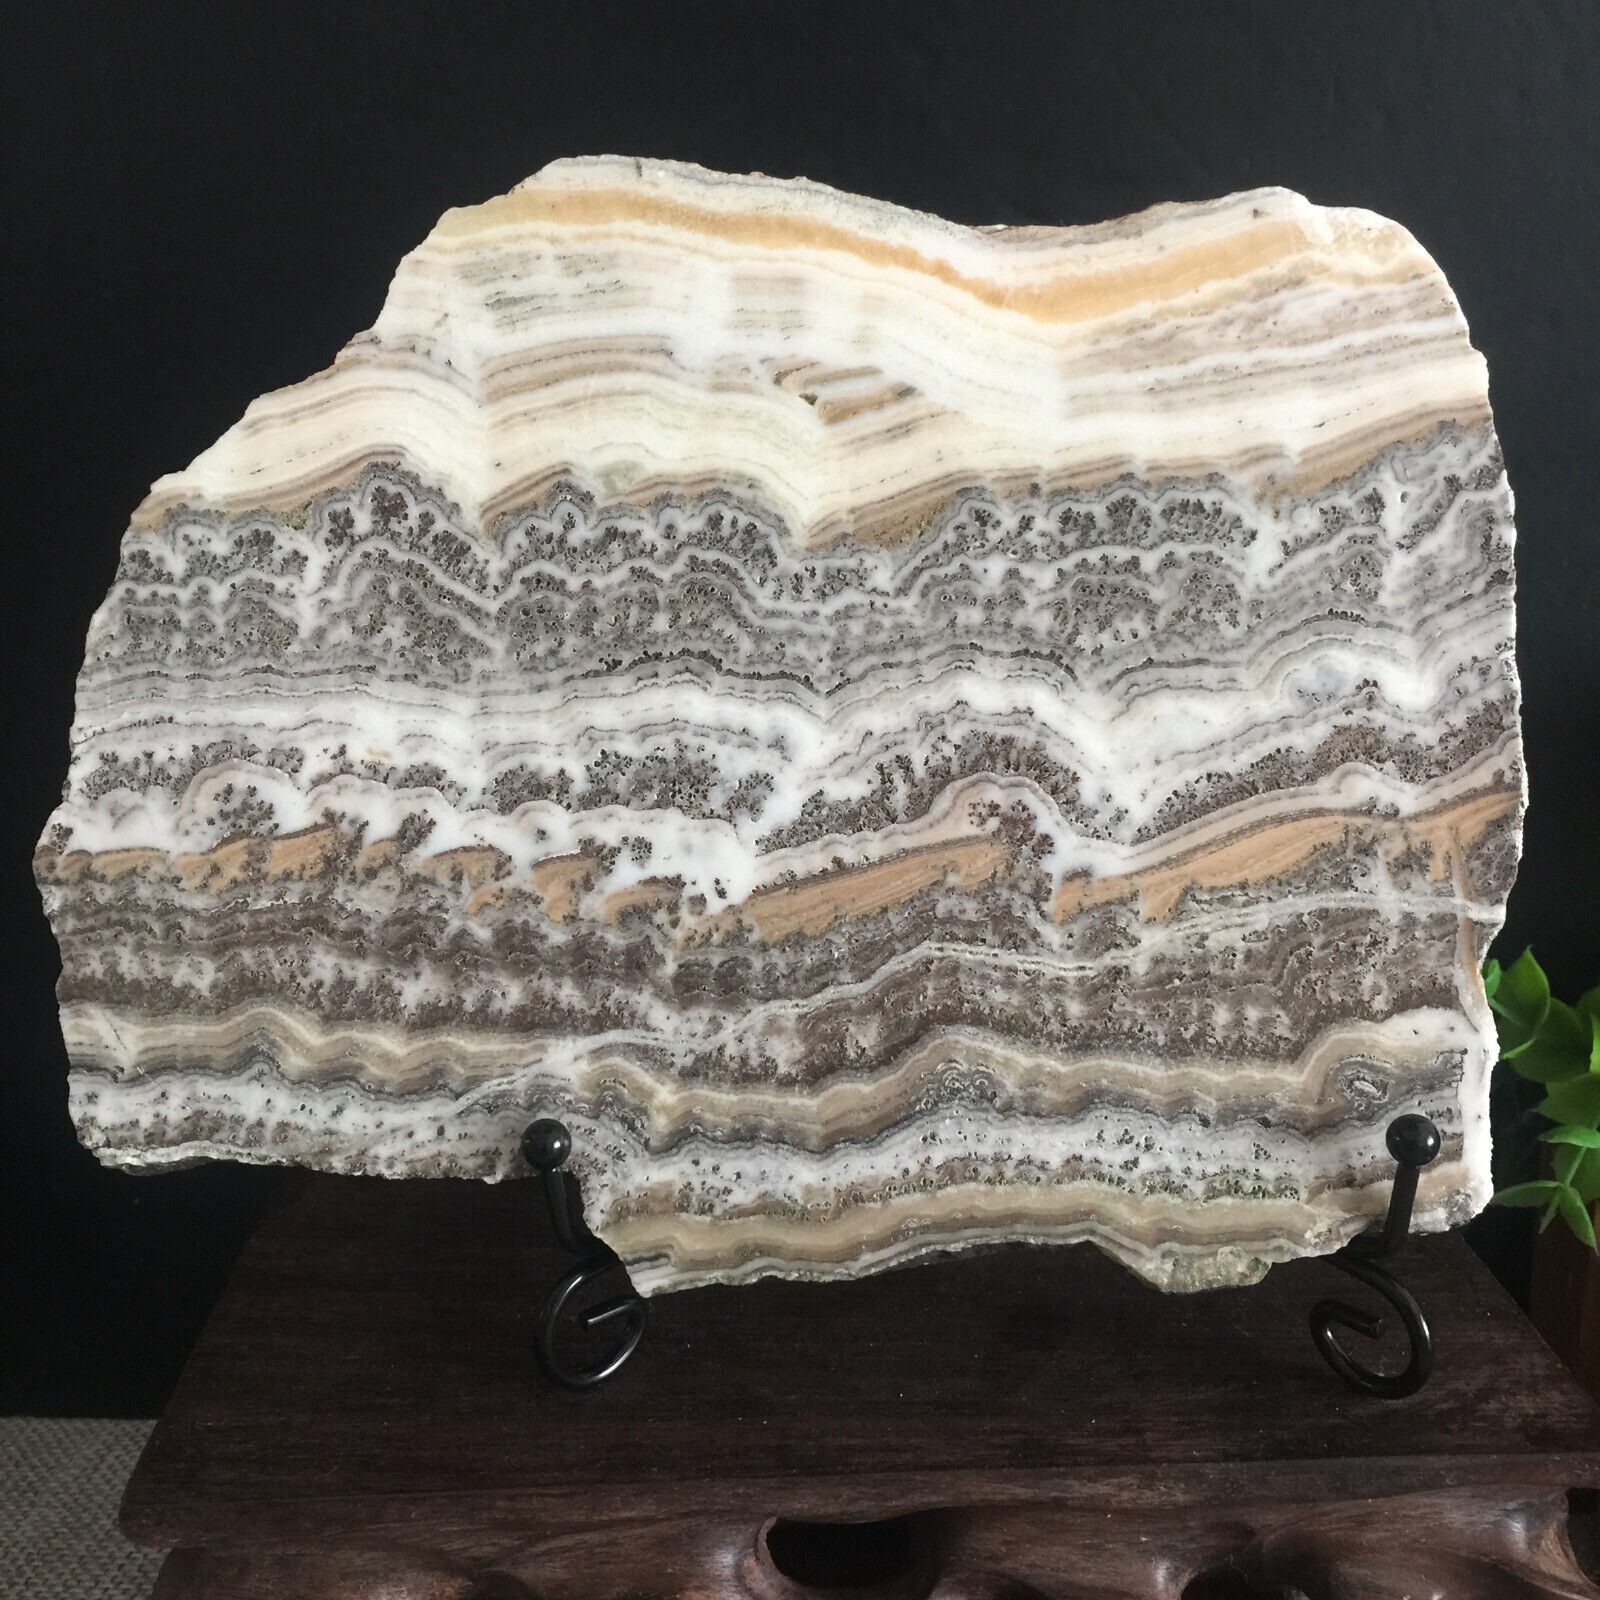 522g Natural Bonsai Calcite Water Grass Picture Rock Rare Stunning Viewing 06